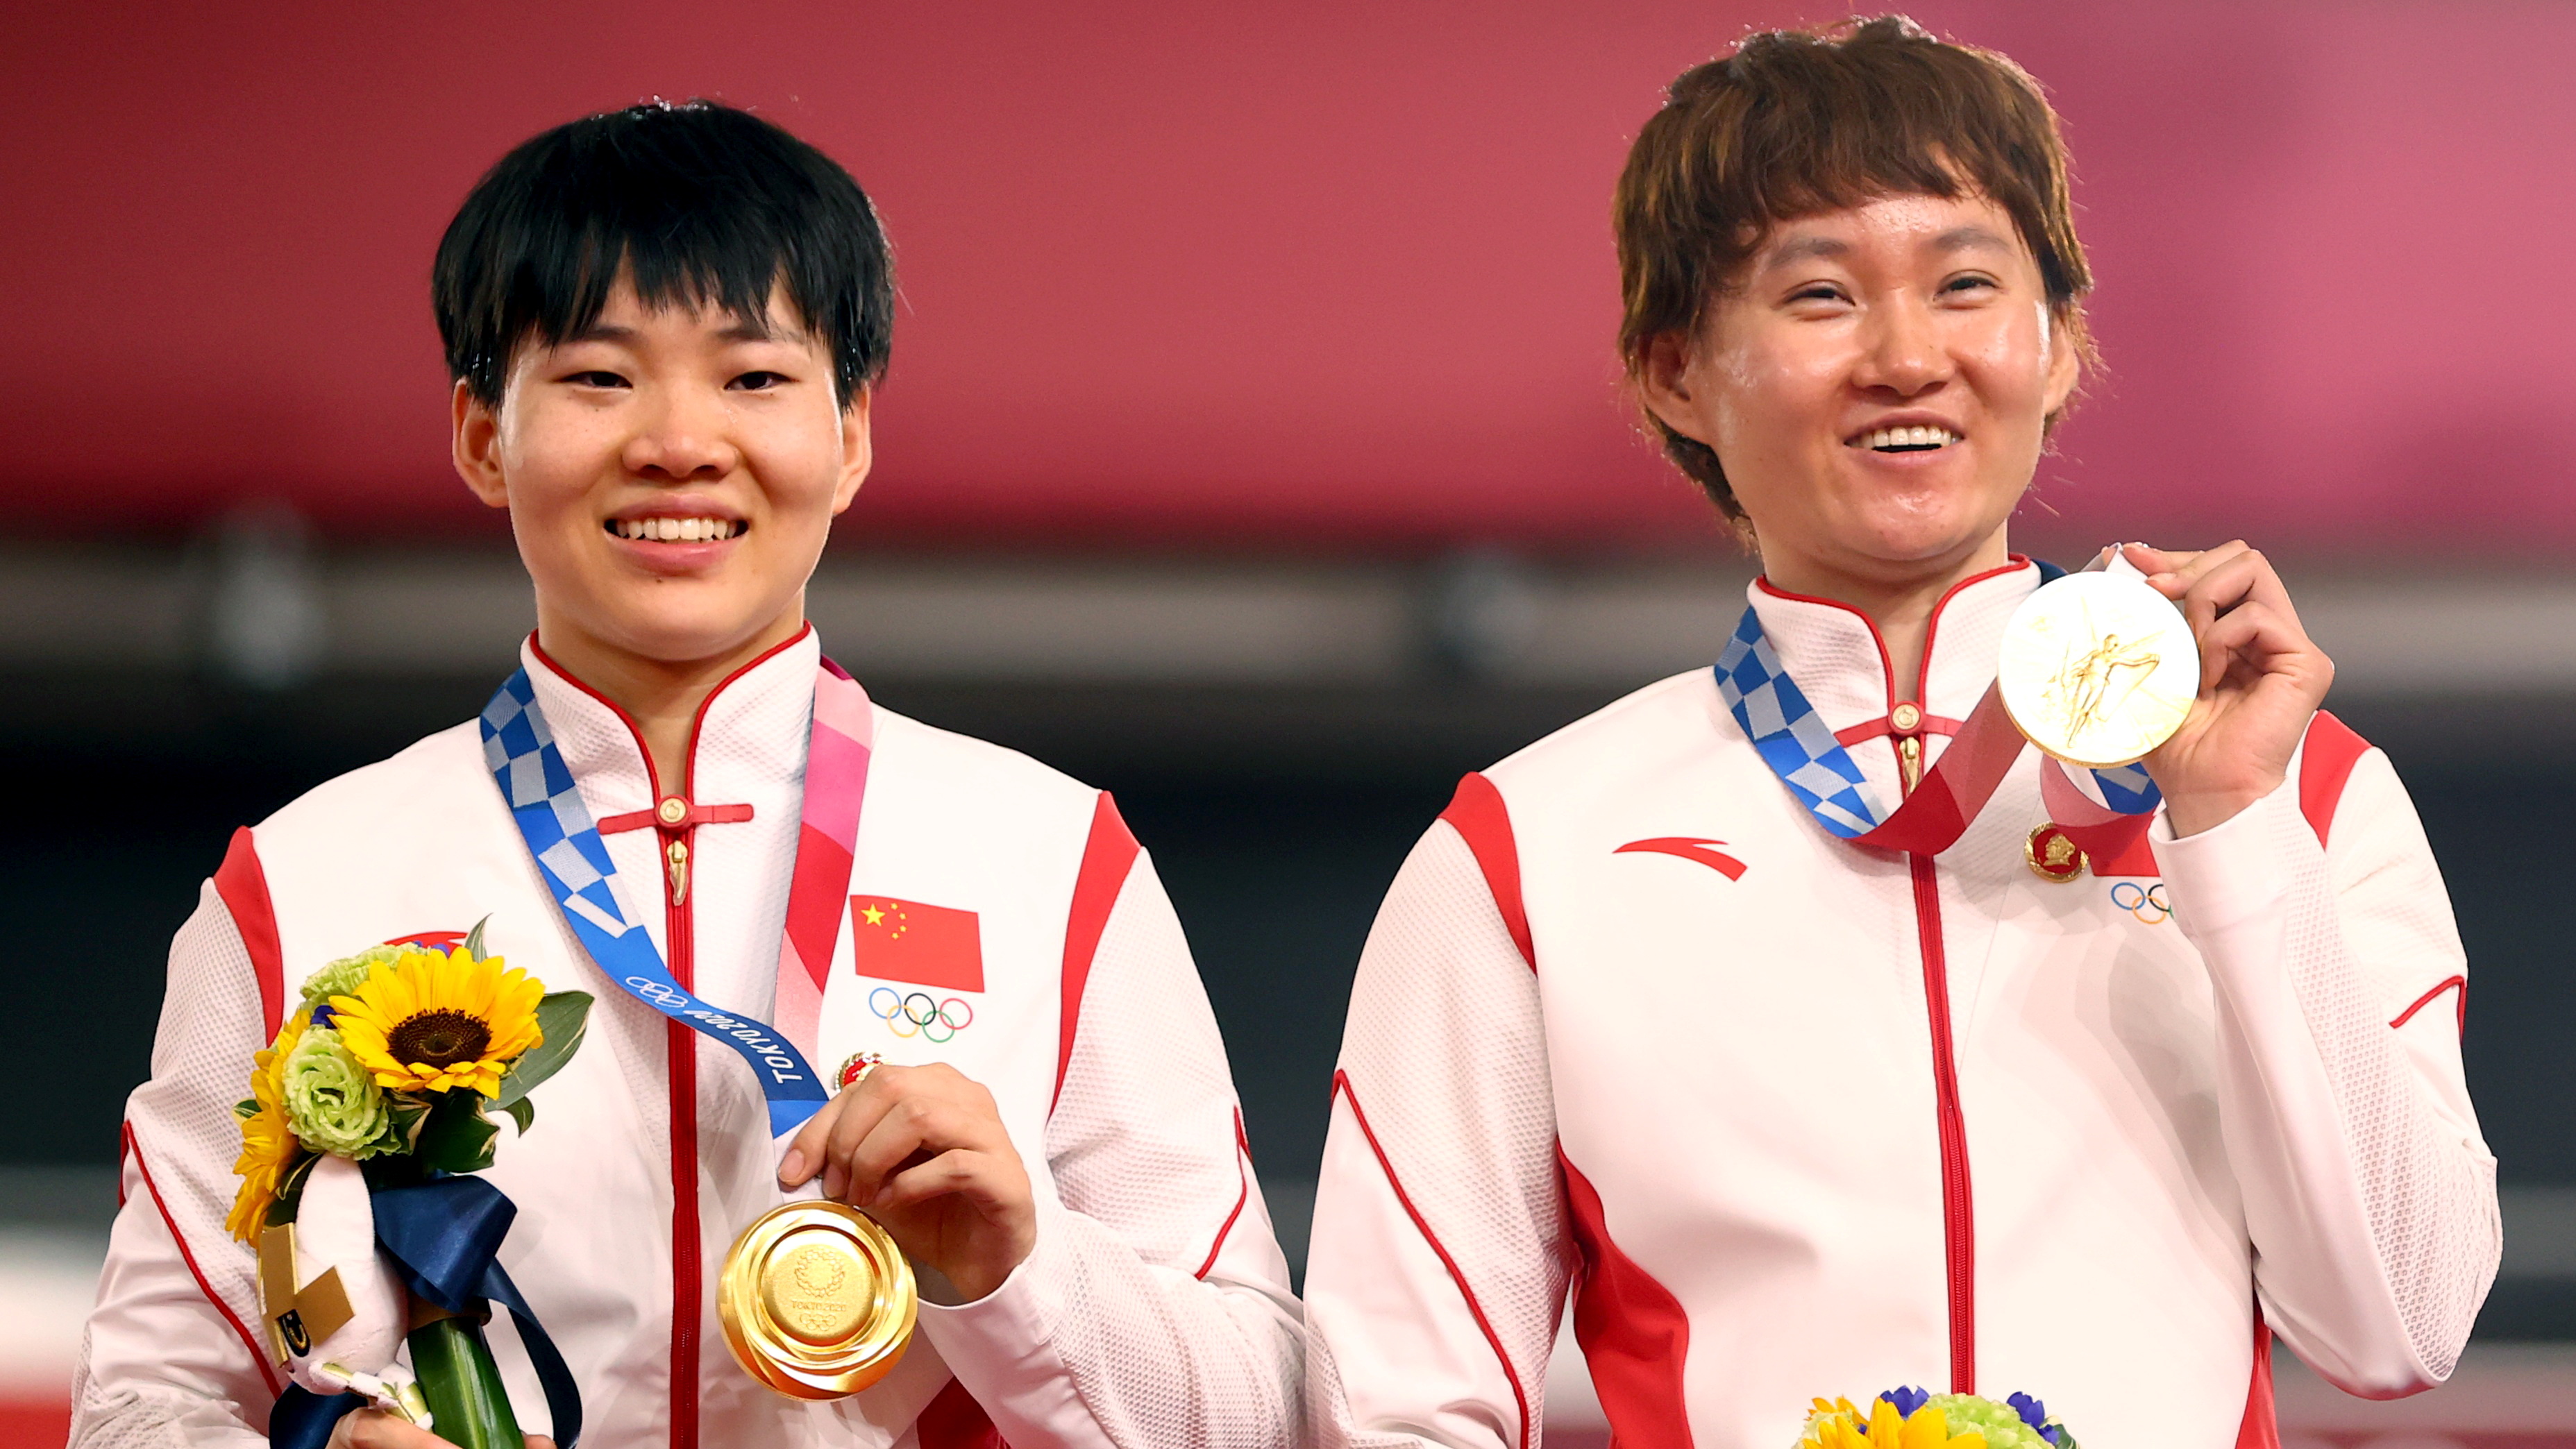 US Championship: Shankland and Wang sprinting to gold